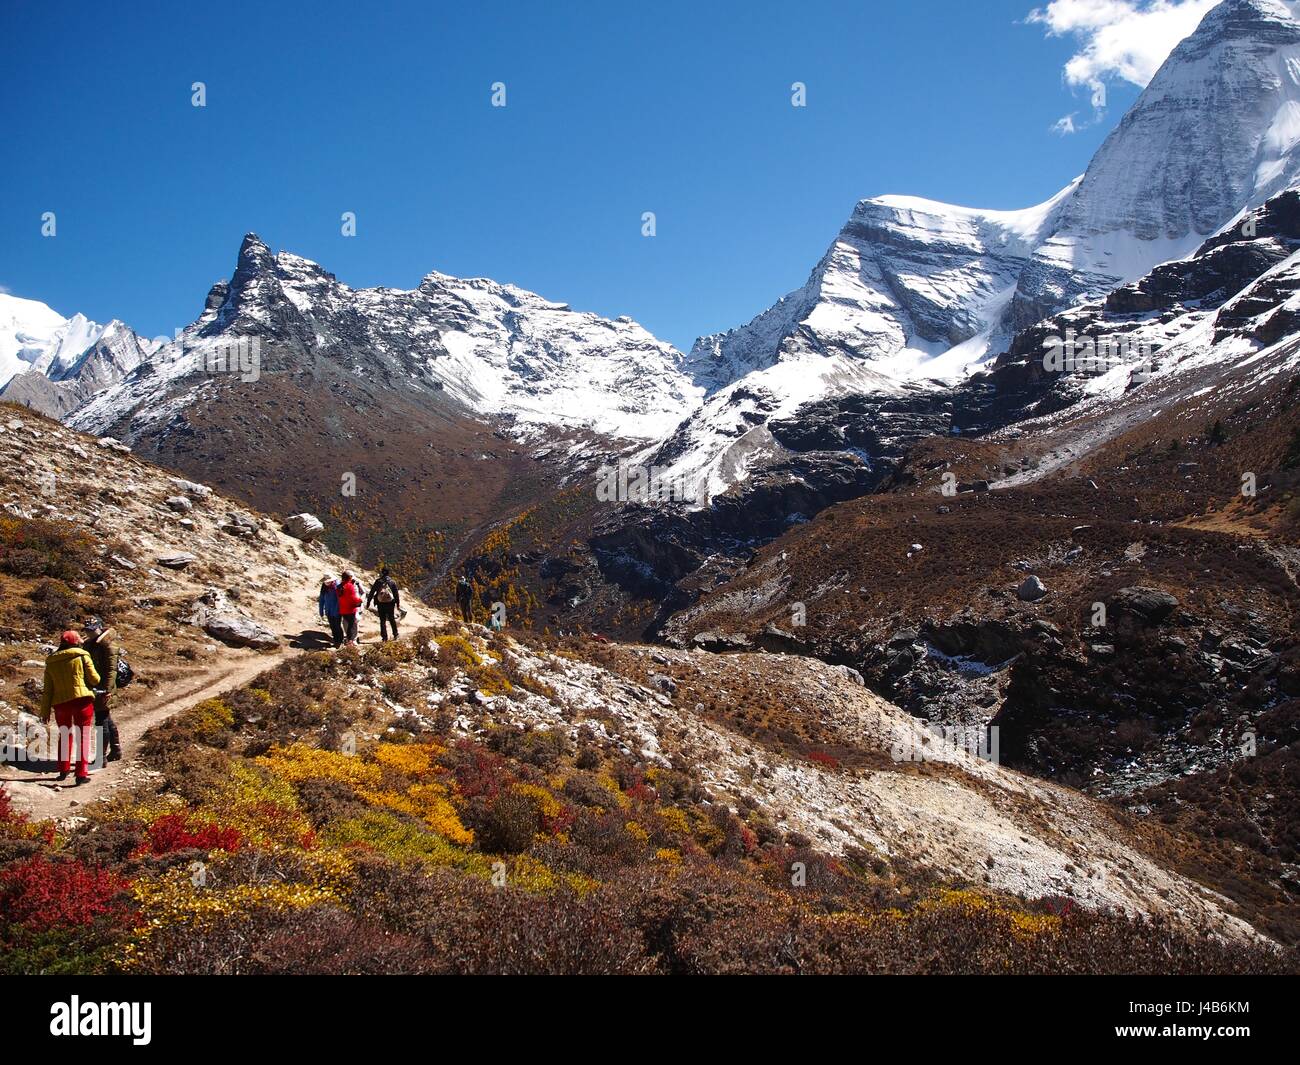 Herbst im Yading Naturreservat in Daocheng County, China Stockfoto